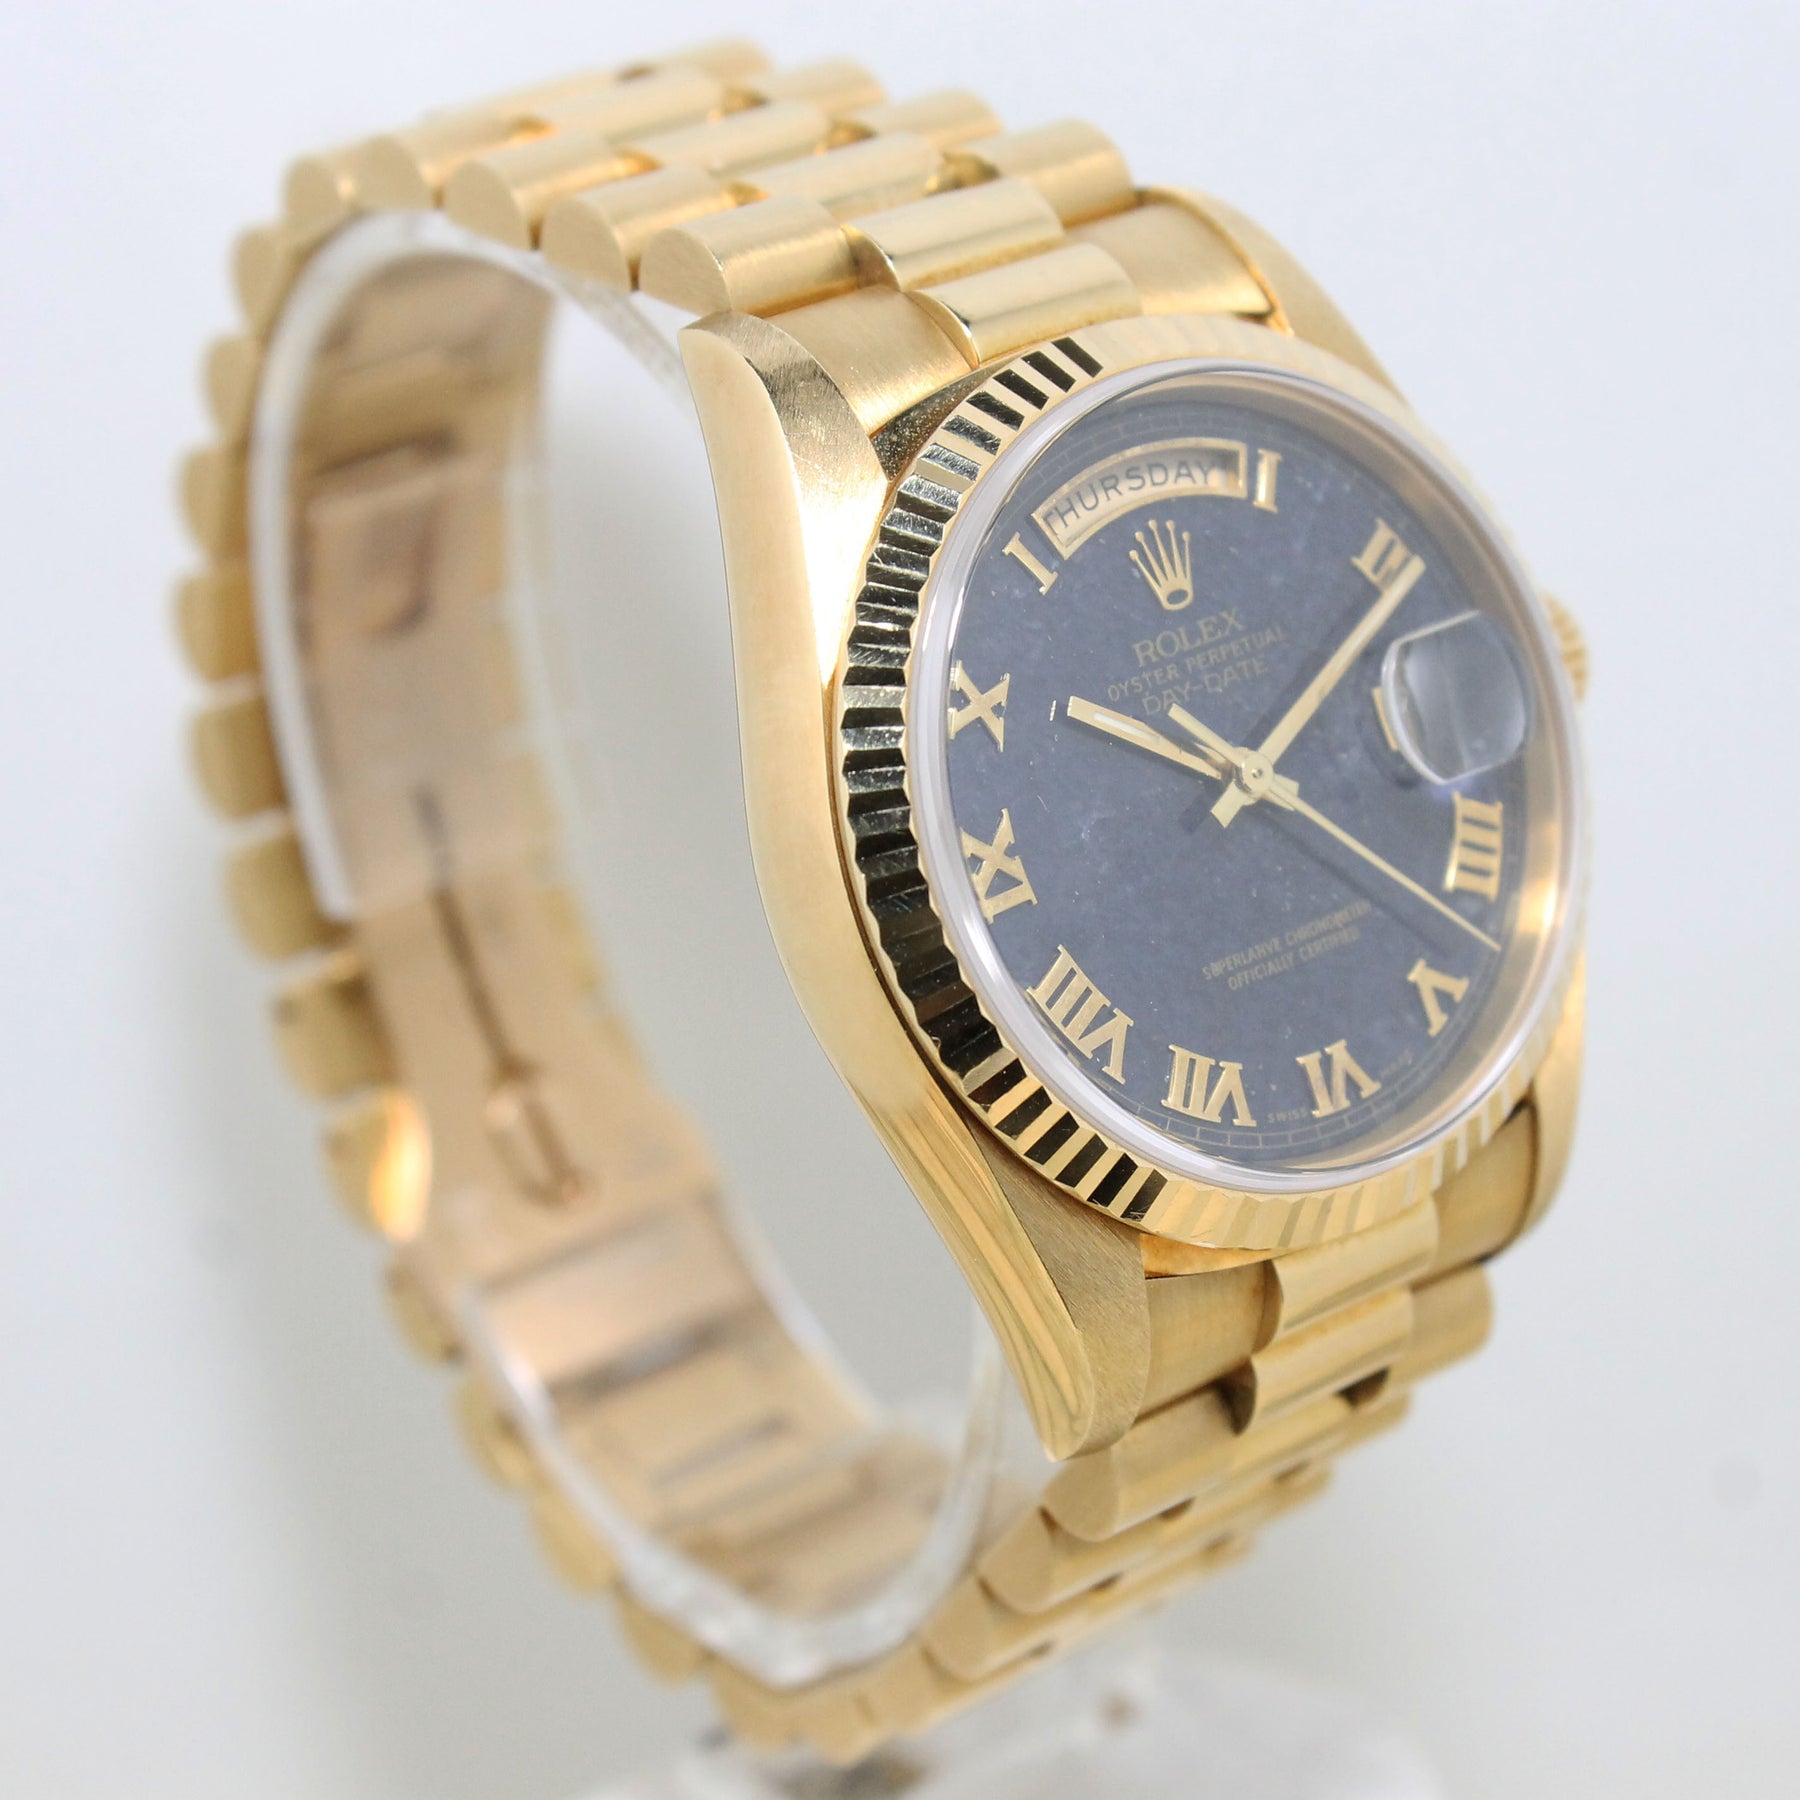 1991 Rolex Day Date Aventurine Dial Ref. 18238 (with Box & Papers)